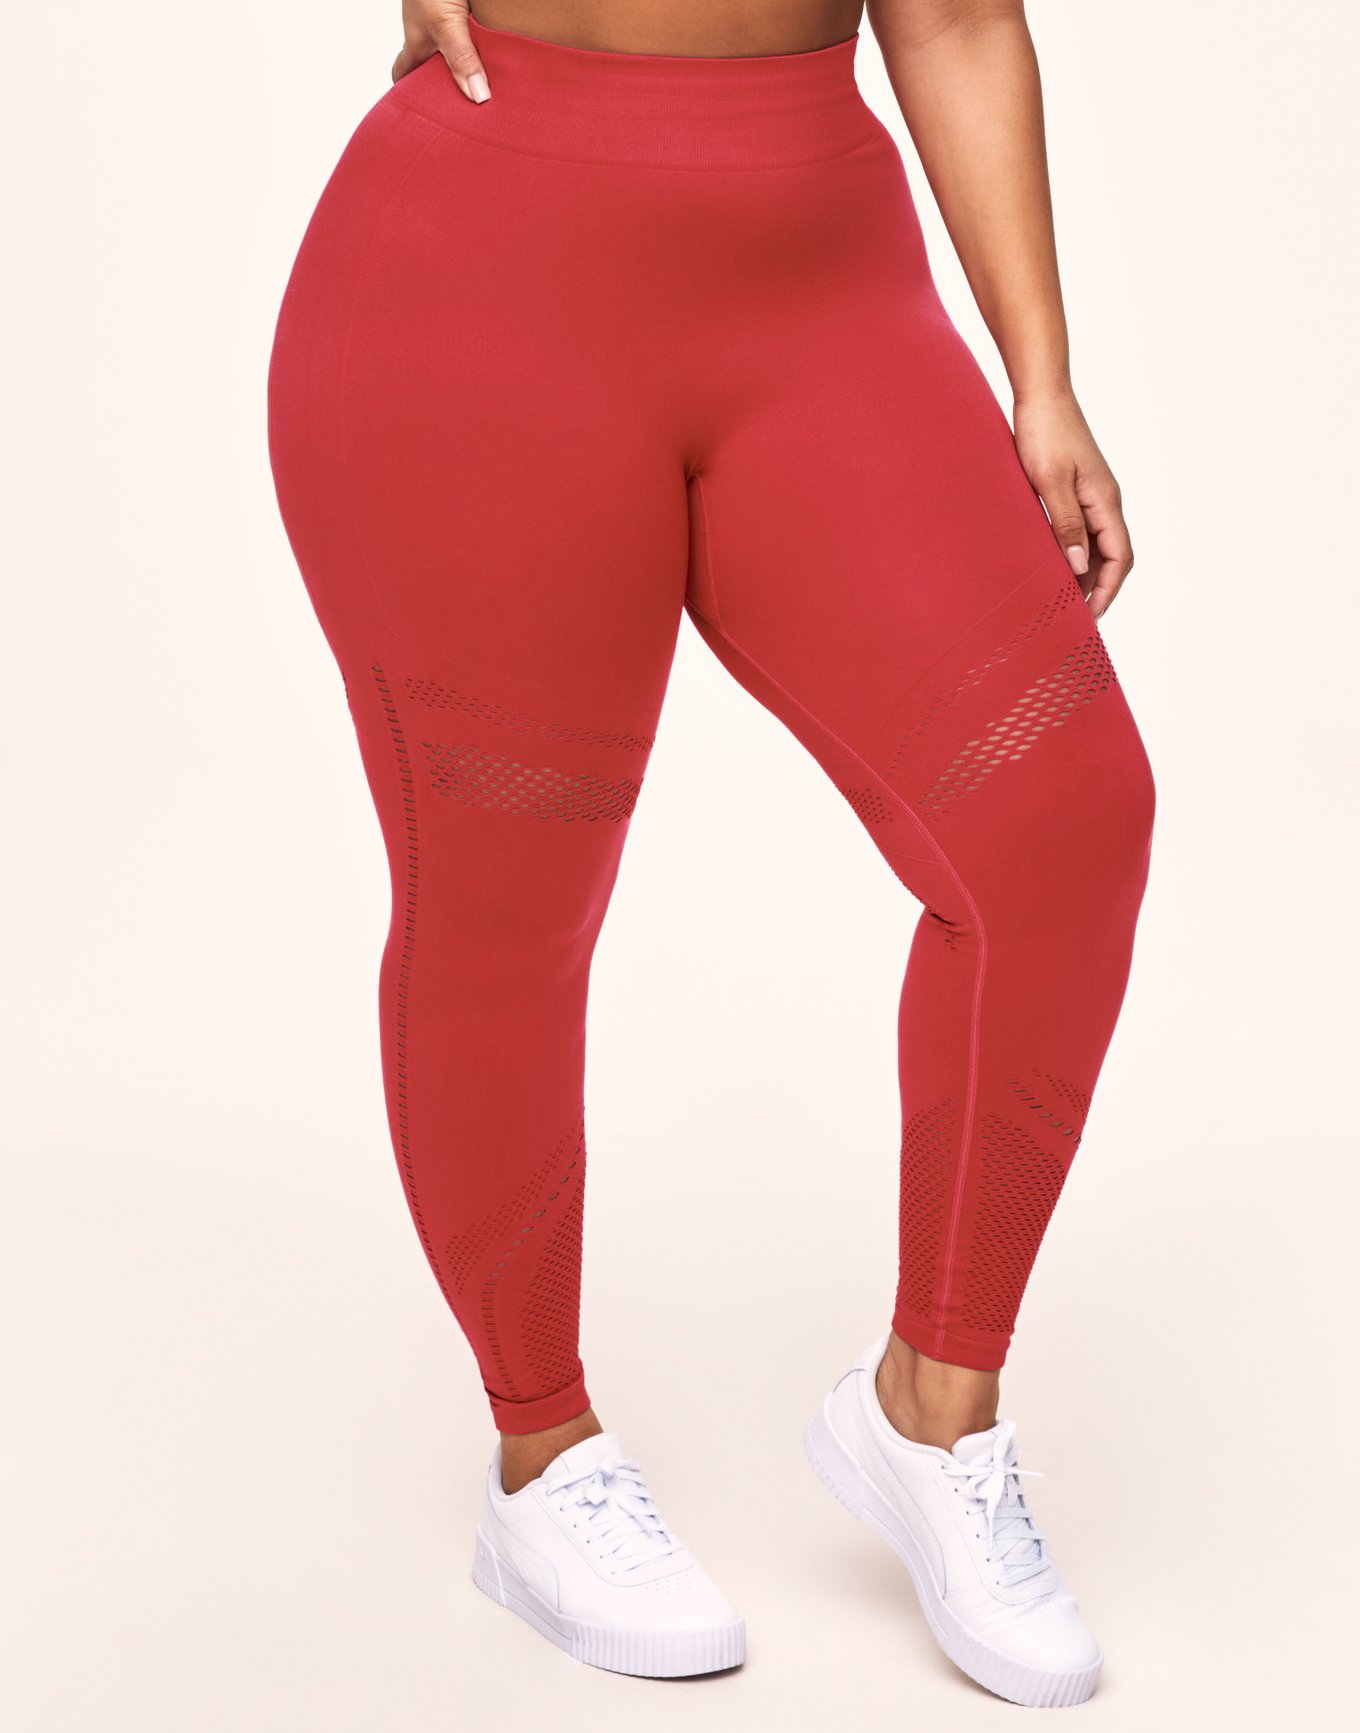 Plus Size Red Yoga Tights.